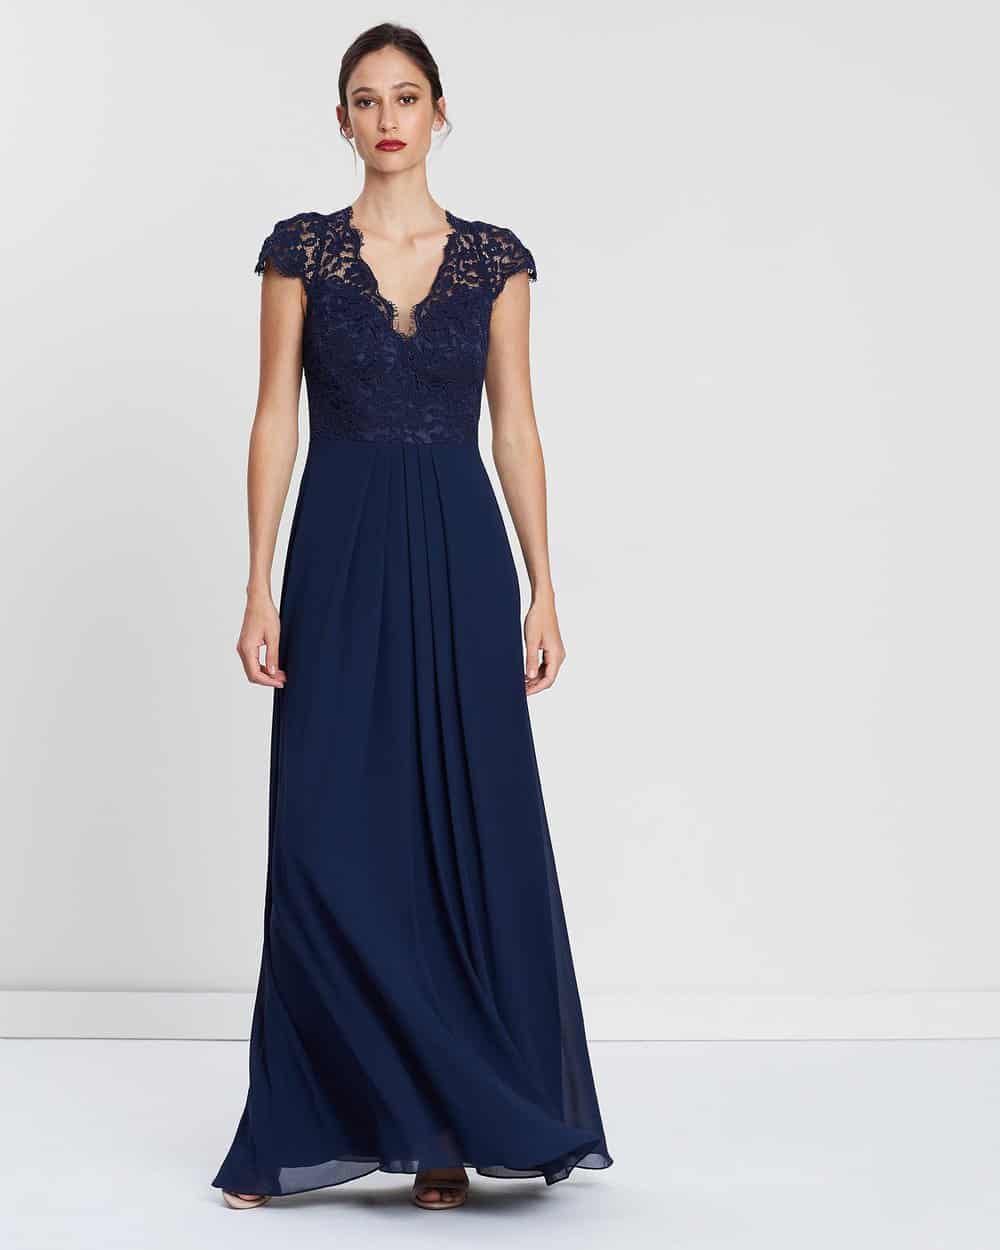 Shop Bridesmaid Dresses: Laced With Romance In Navy